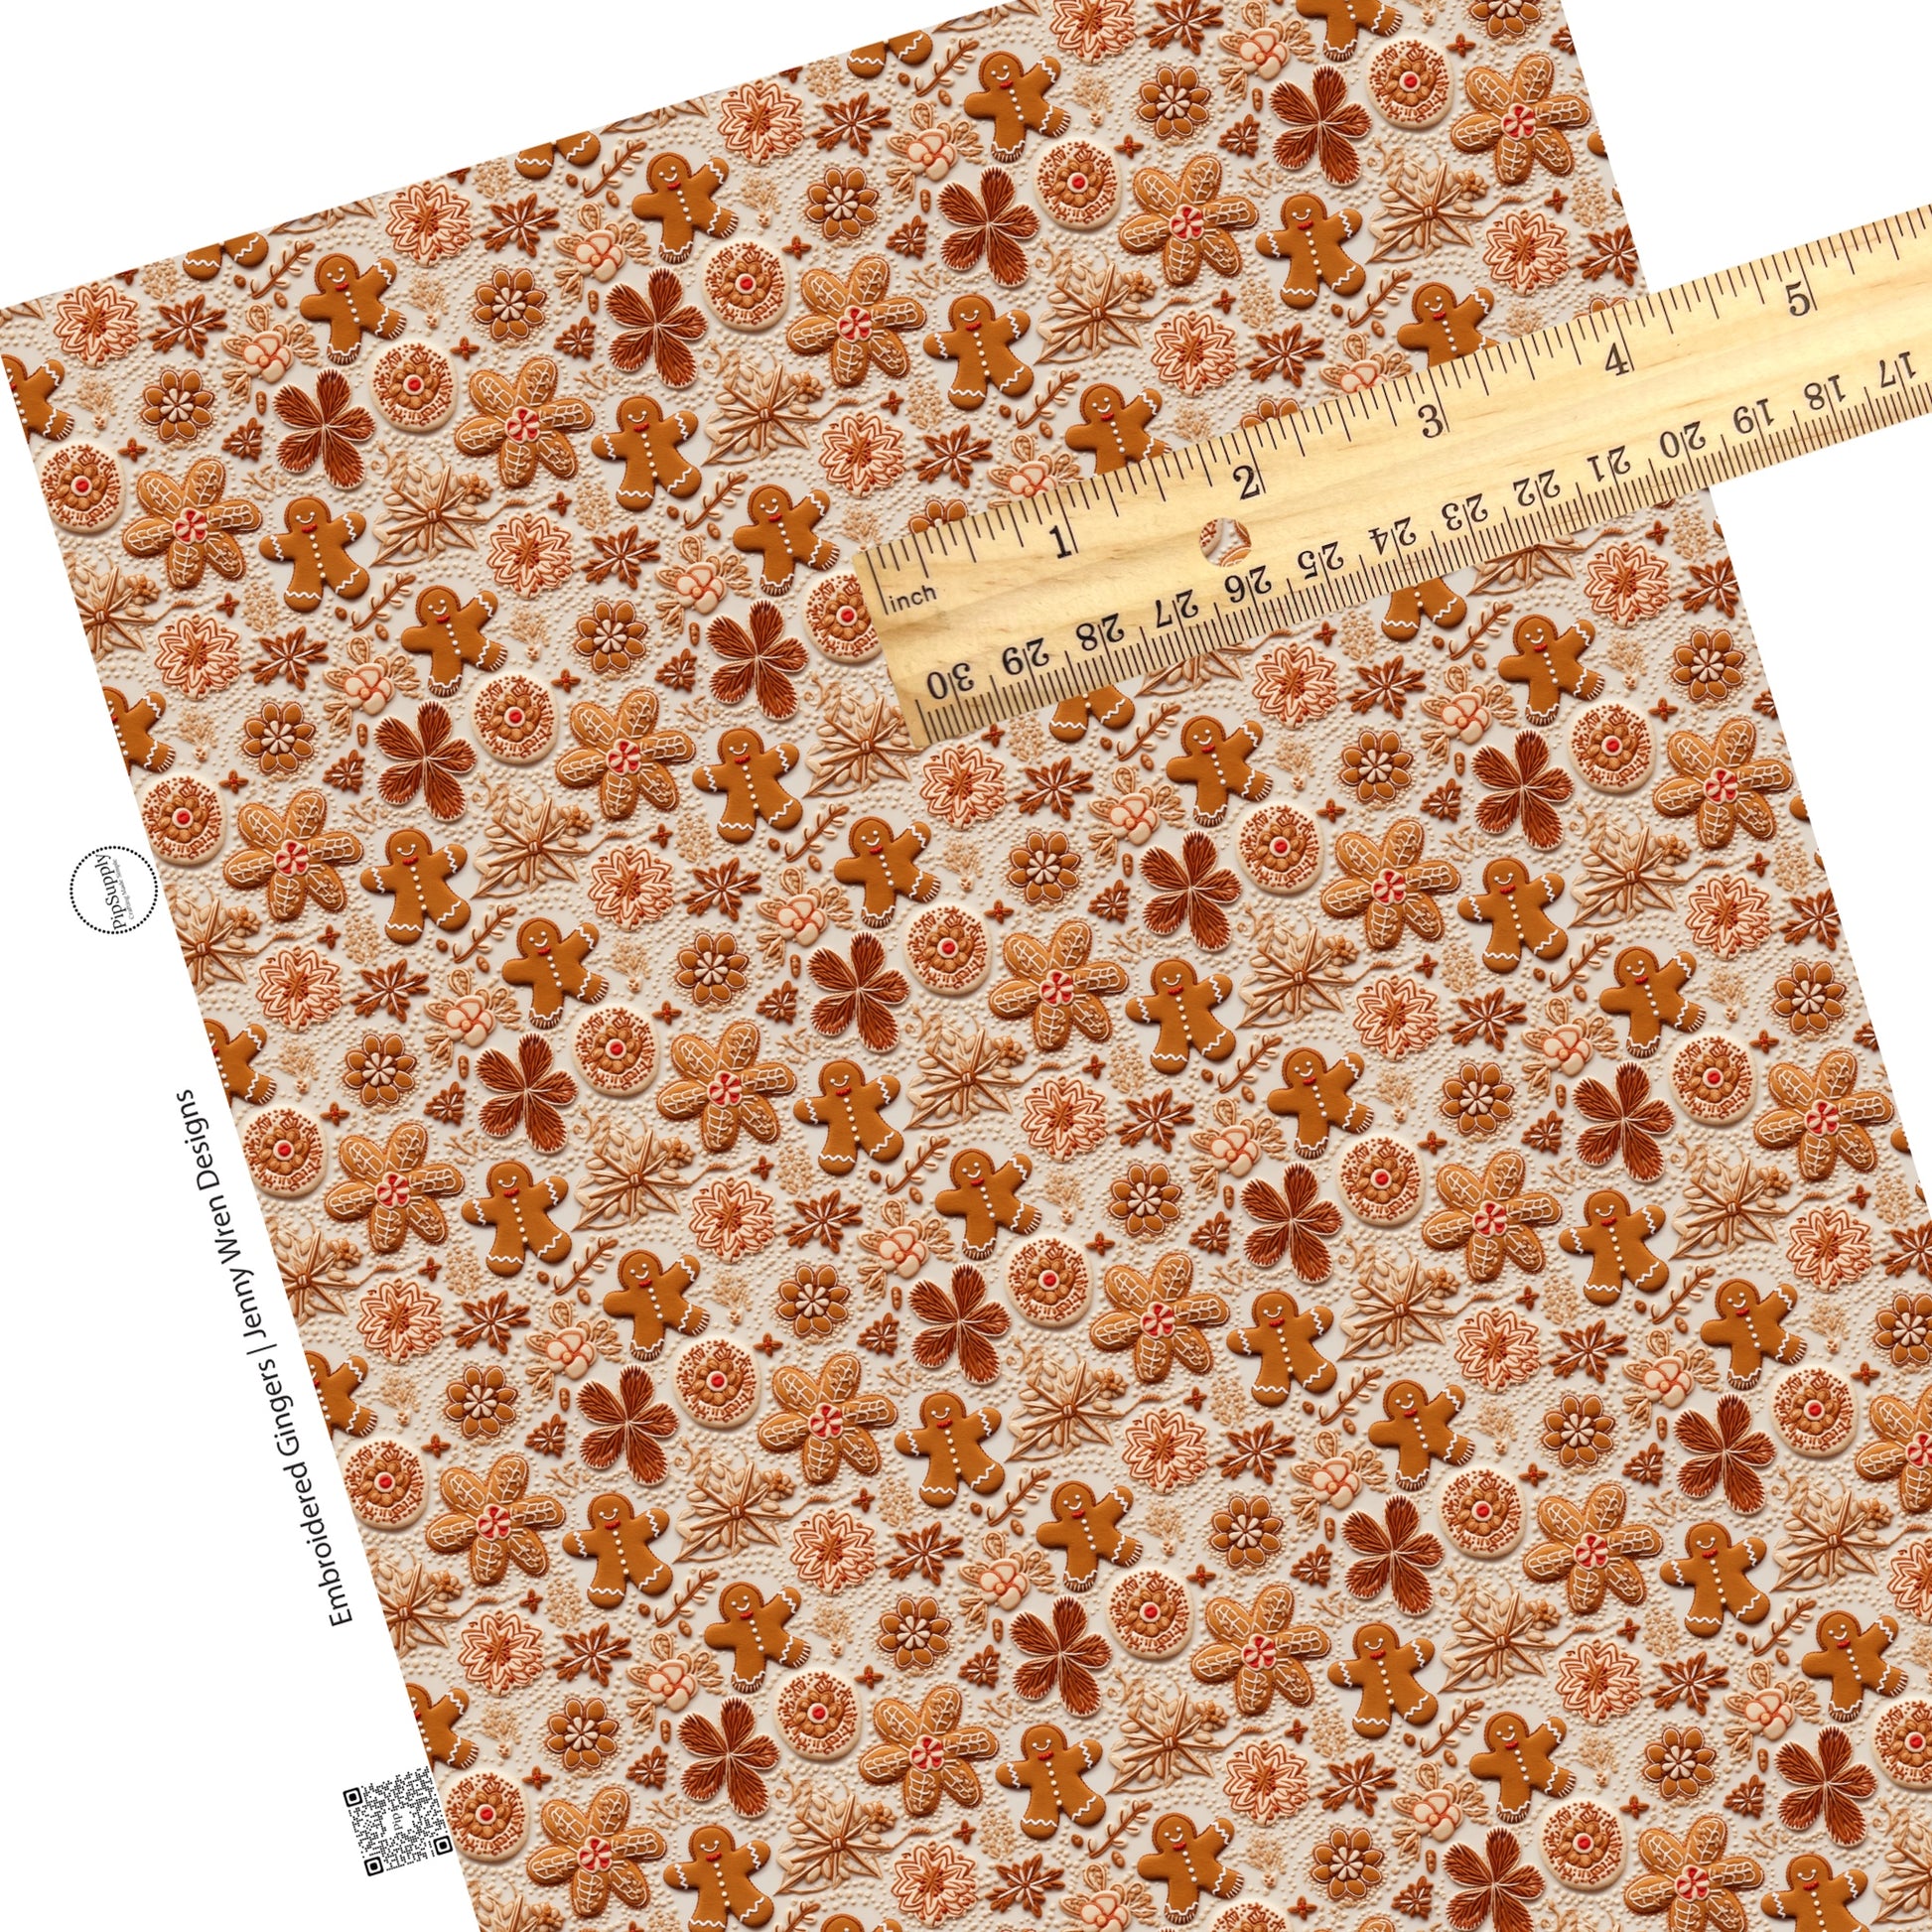 These holiday sewn pattern themed faux leather sheets contain the following design elements: Christmas gingerbread cookies. Our CPSIA compliant faux leather sheets or rolls can be used for all types of crafting projects.